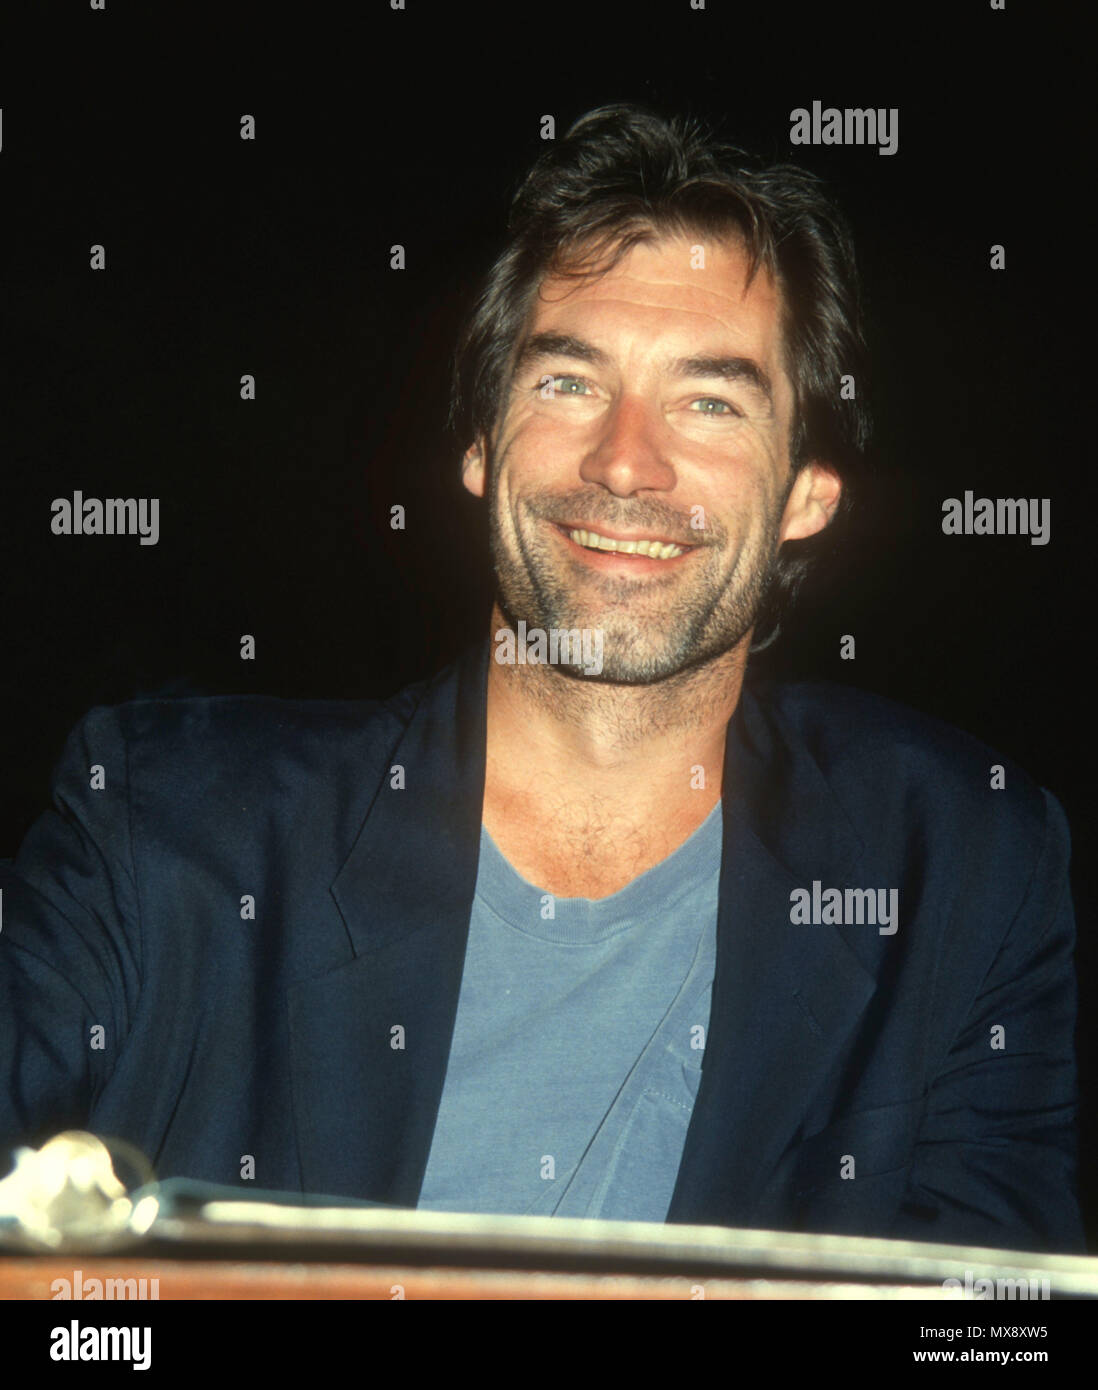 BEVERLY HILLS, CA - AUGUST 04: Actor Timothy Dalton attends the final night performance of 'Love Letters' on August 4, 1991 at the Canon Theatre in Beverly Hills, California. Photo by Barry King/Alamy Stock Photo Stock Photo